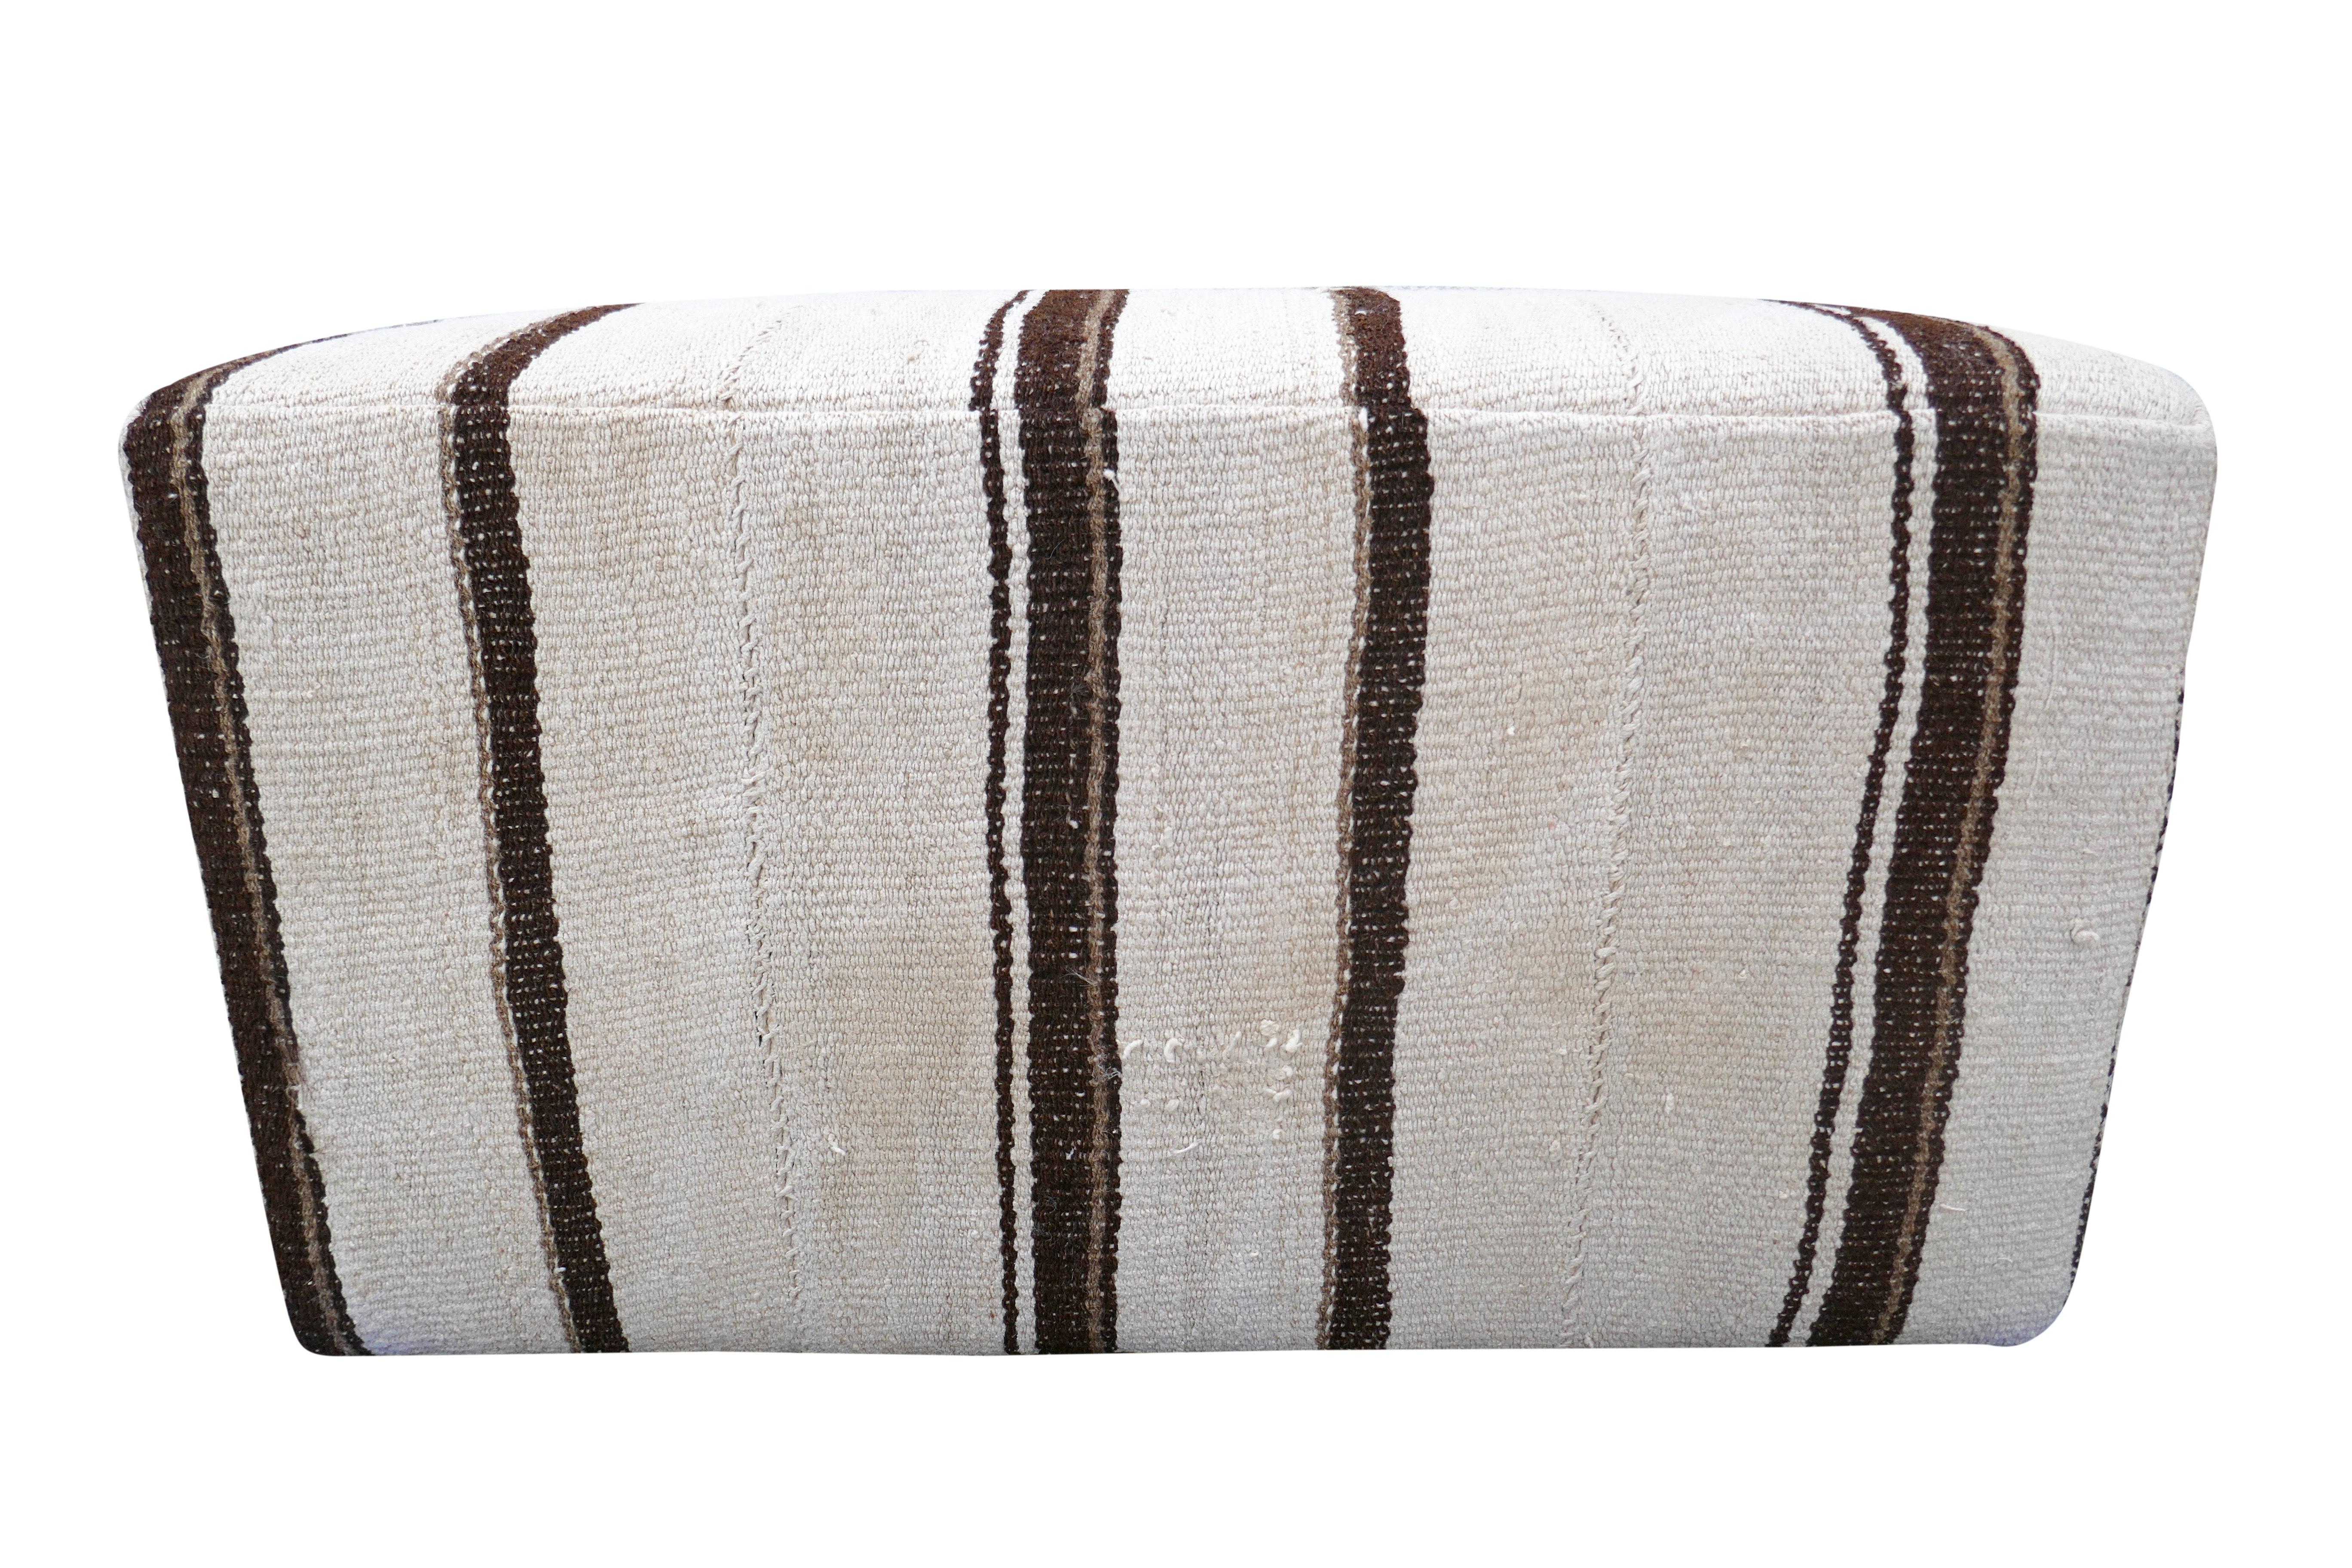 FI Custom Ottoman in Vintage Berber Kilim Wool. Versatile scale as extra pull-in seating and propping. Created from our collection of authentic specialty one-of-a-kind global textiles. Absolutely beautiful and featuring much desirable natural age